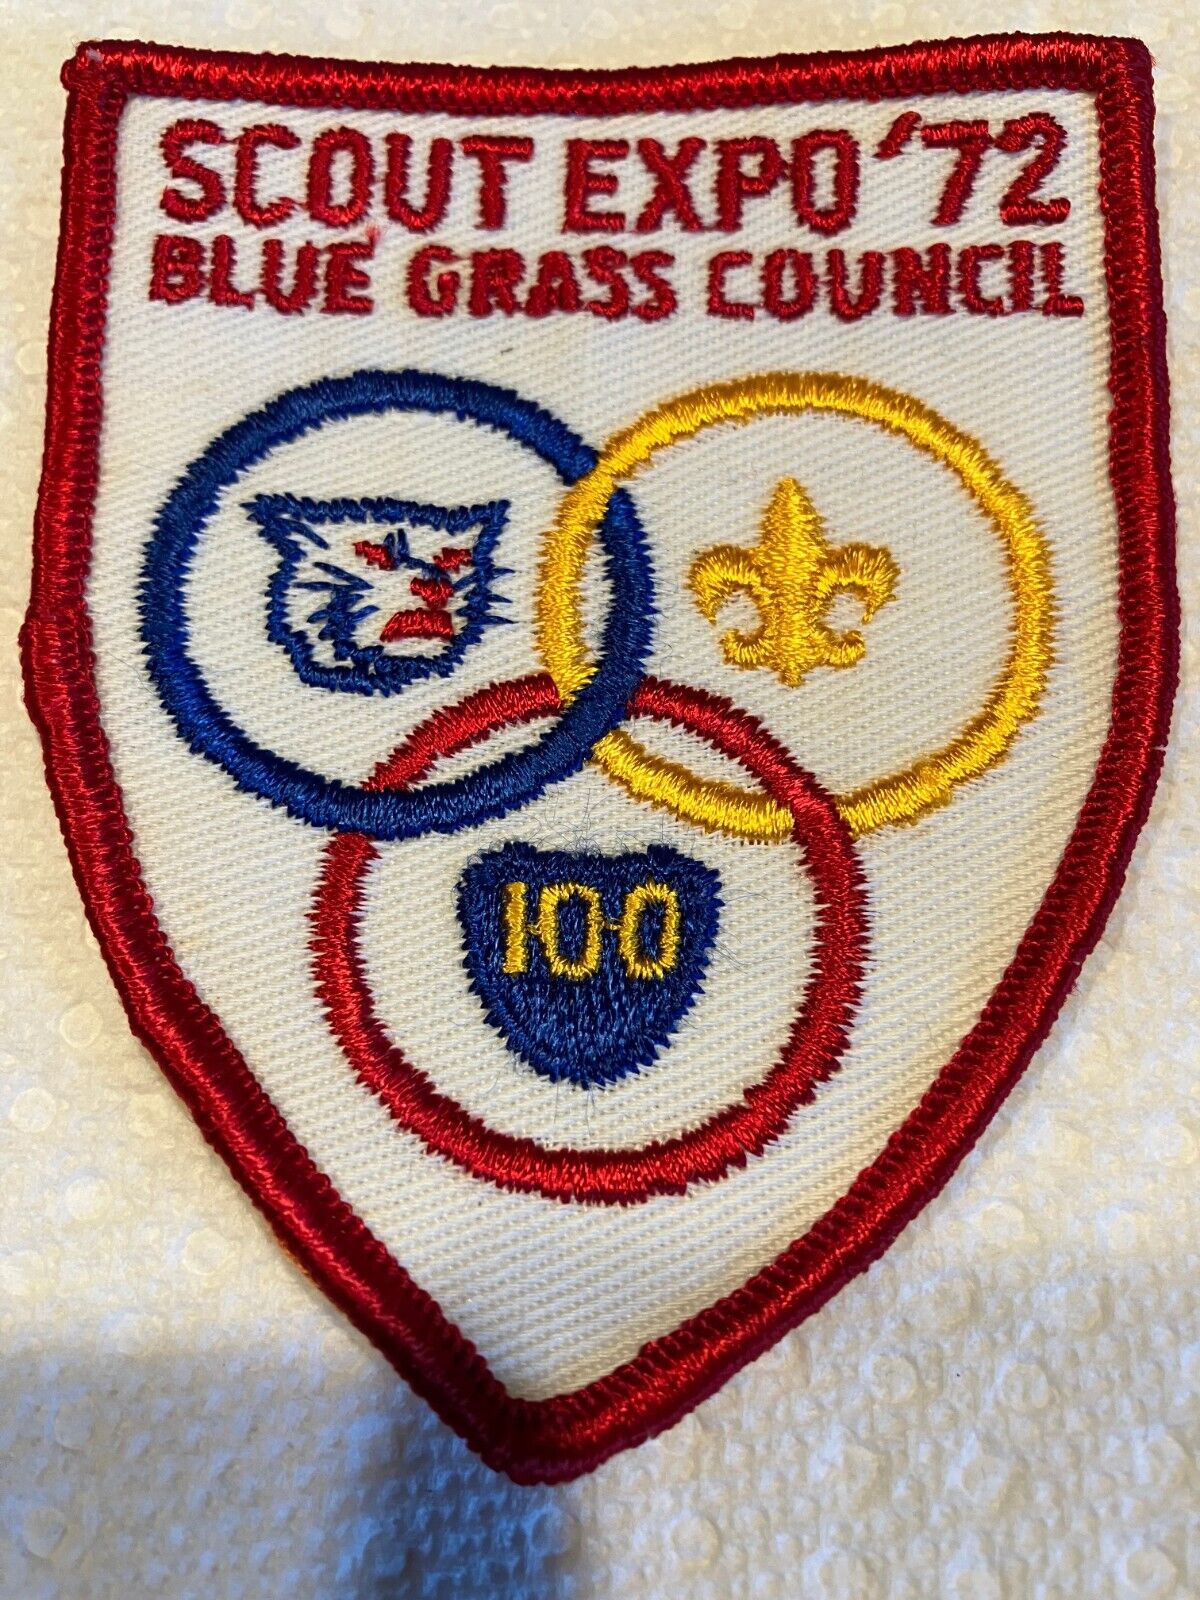 1972 Blue Grass Council 100 Boy Cub Scout Twill Embroidery Patch Gauze Back BSA